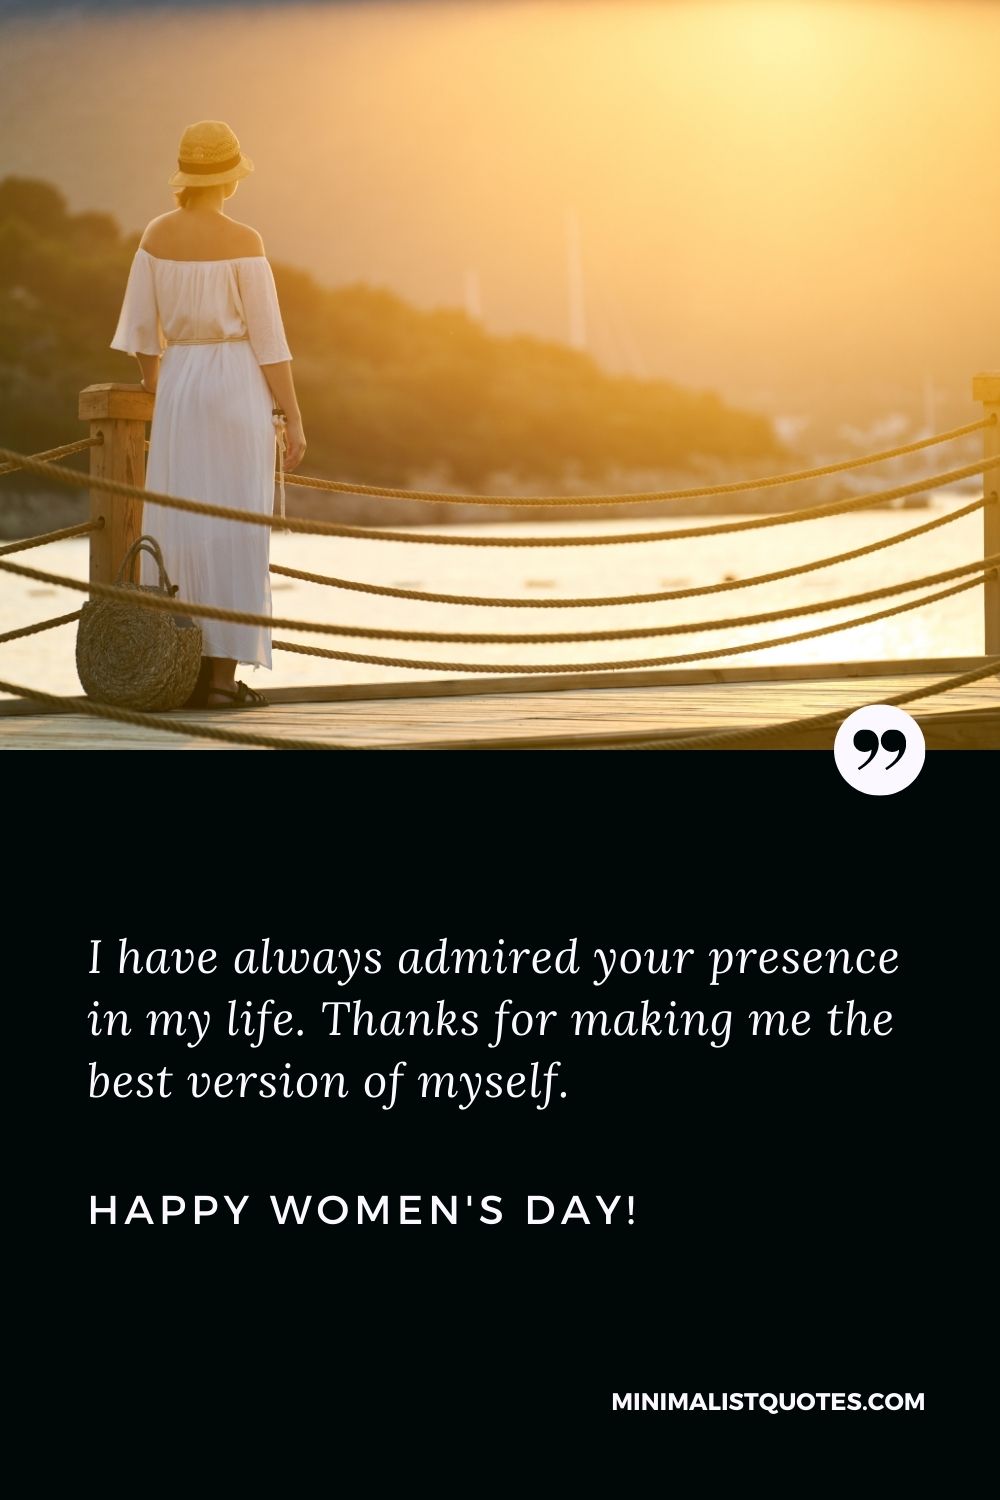 Mother's day wish for mom: I have always admired your presence in my life. Thanks for making me the best version of myself. Happy Womens Day!